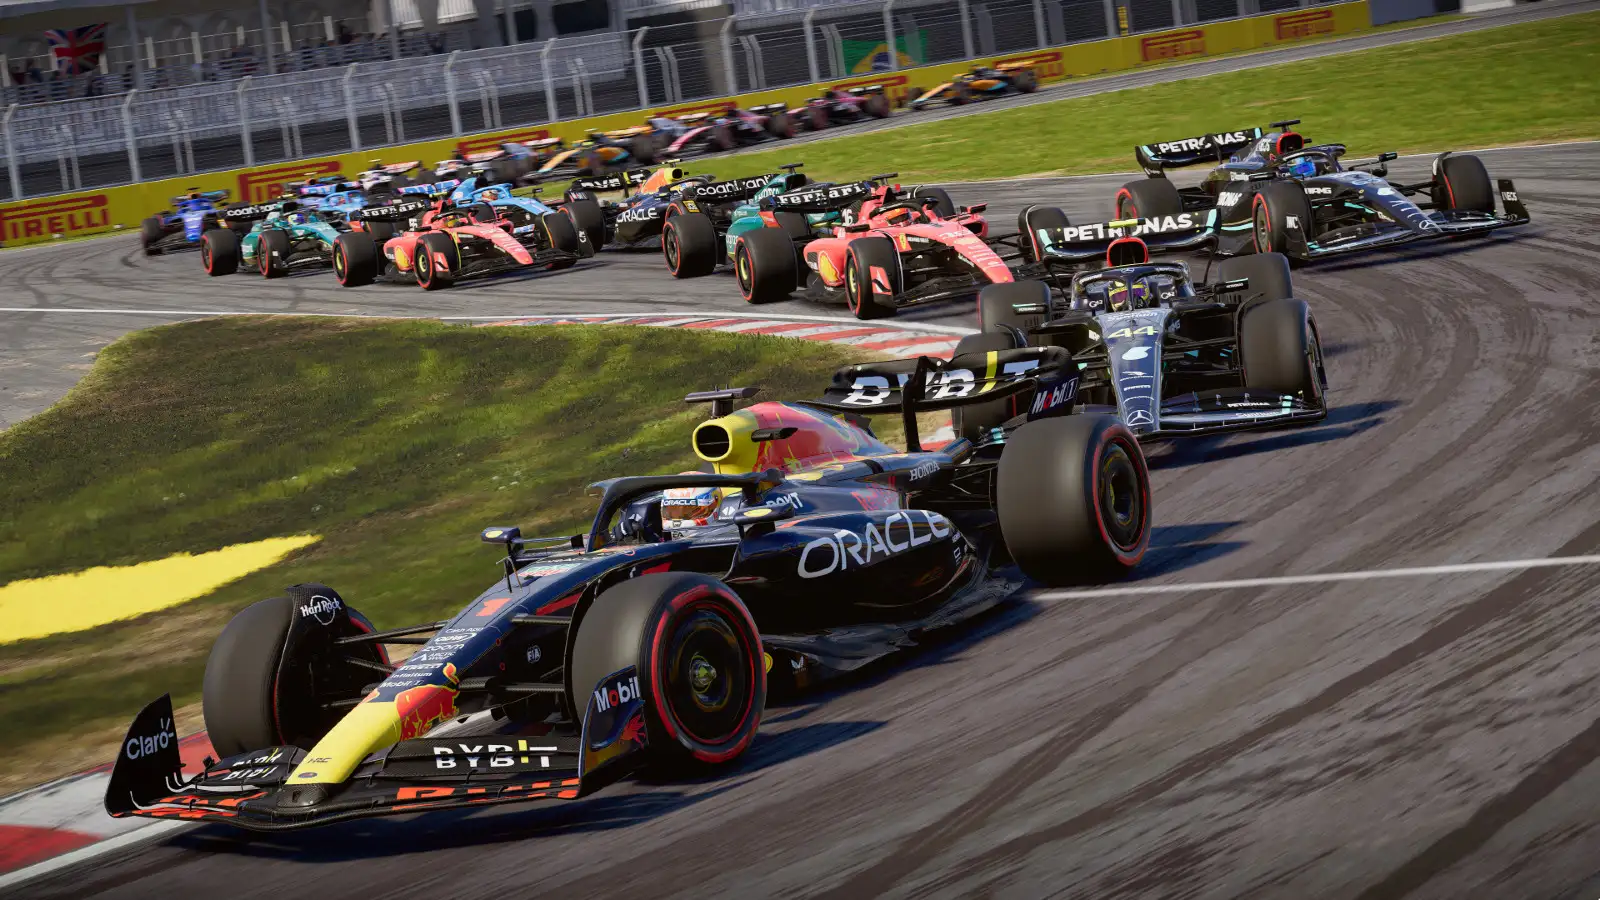 F1 2023 coming in June and will bring back story mode